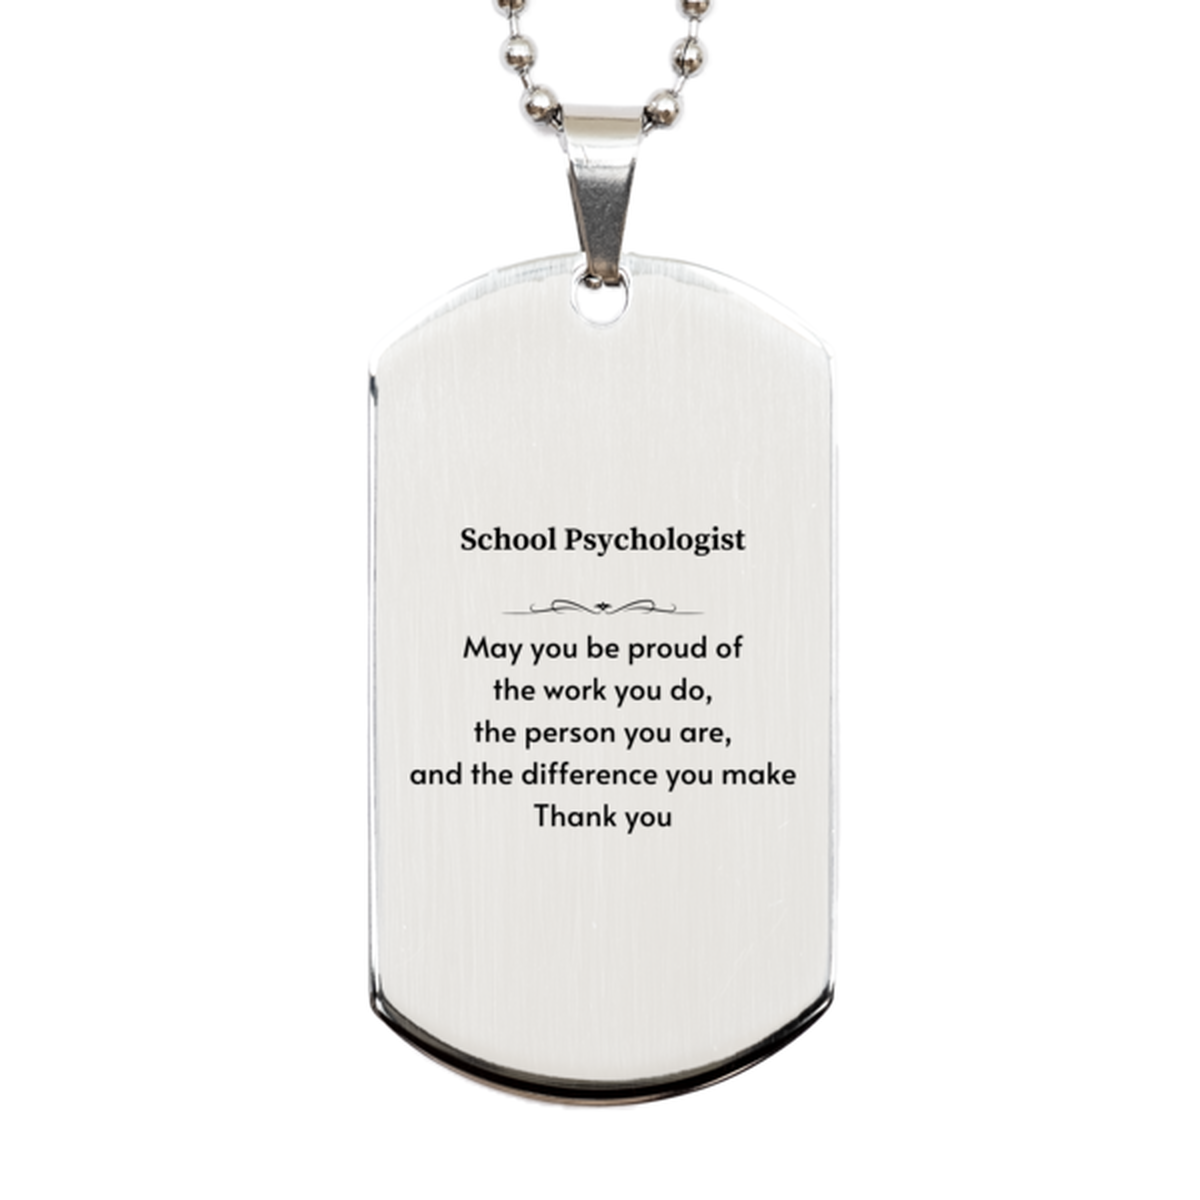 Heartwarming Silver Dog Tag Retirement Coworkers Gifts for School Psychologist, School Psychologist May You be proud of the work you do, the person you are Gifts for Boss Men Women Friends